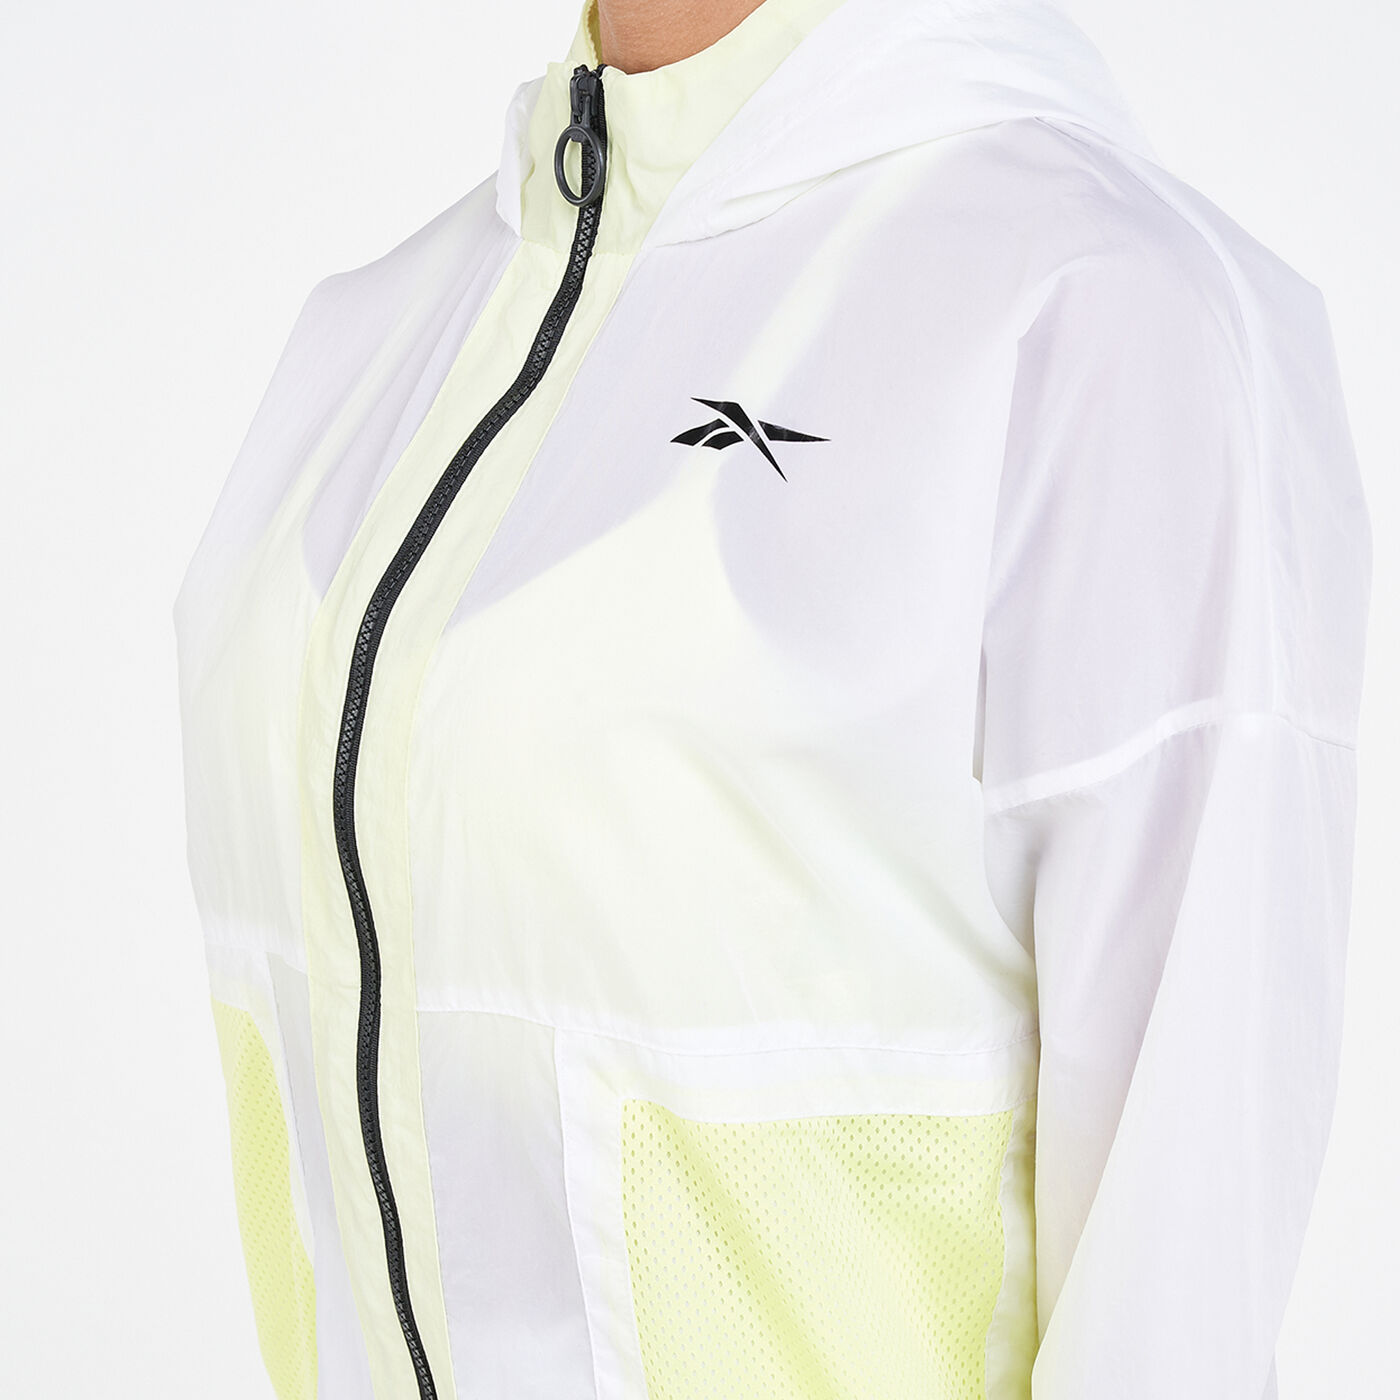 Women's Meet You There Jacket